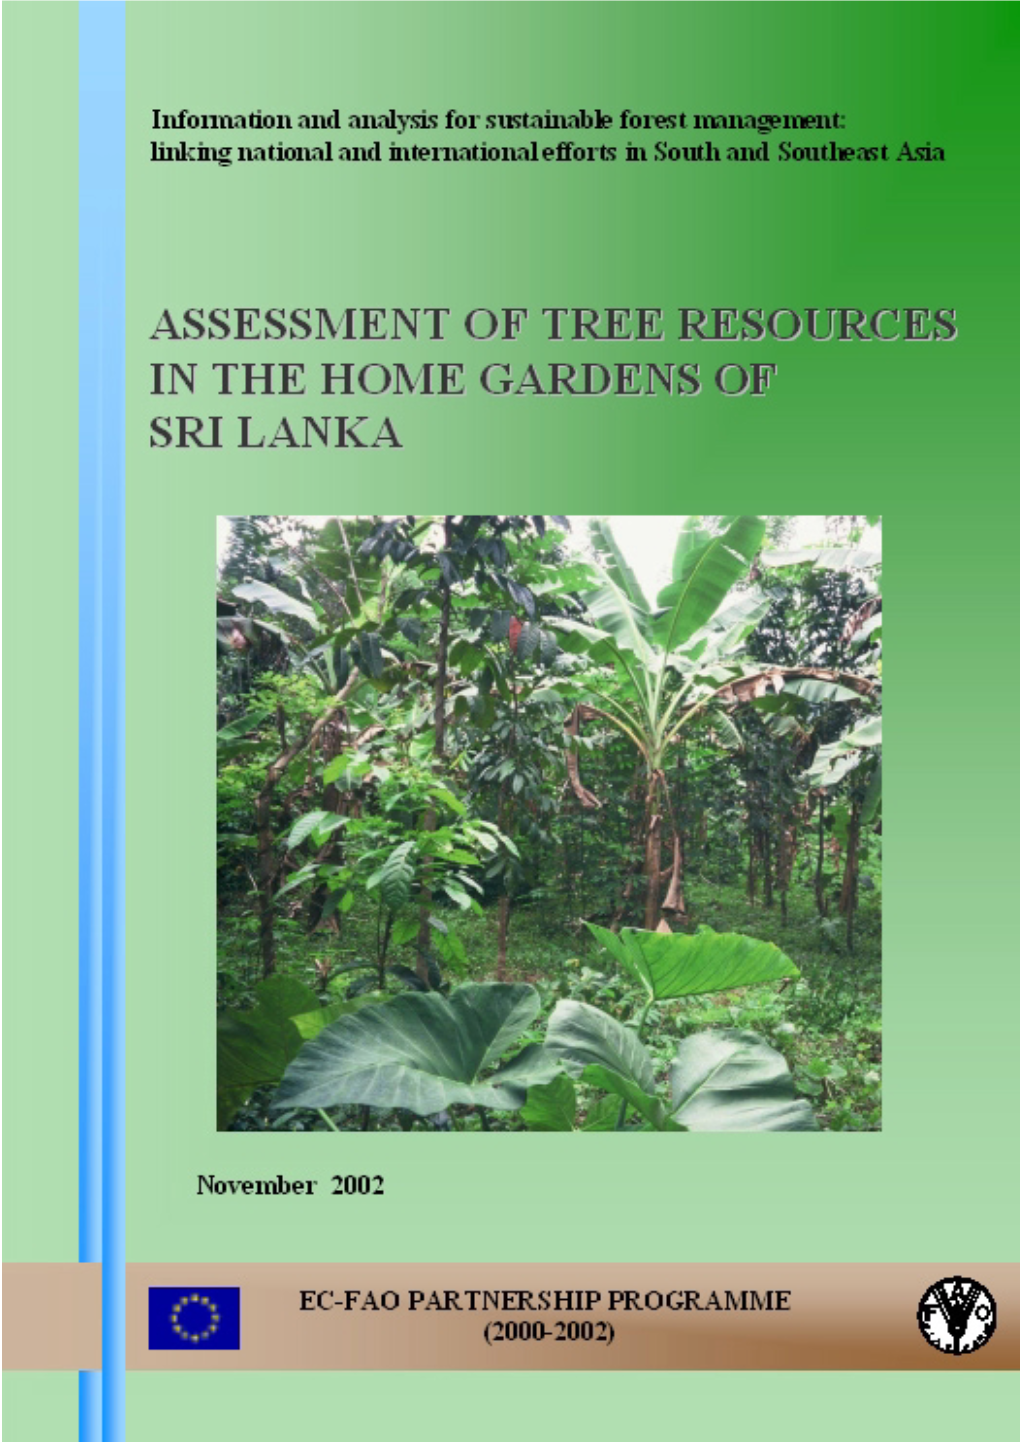 Assessment of Tree Resources in the Home Gardens of Sri Lanka